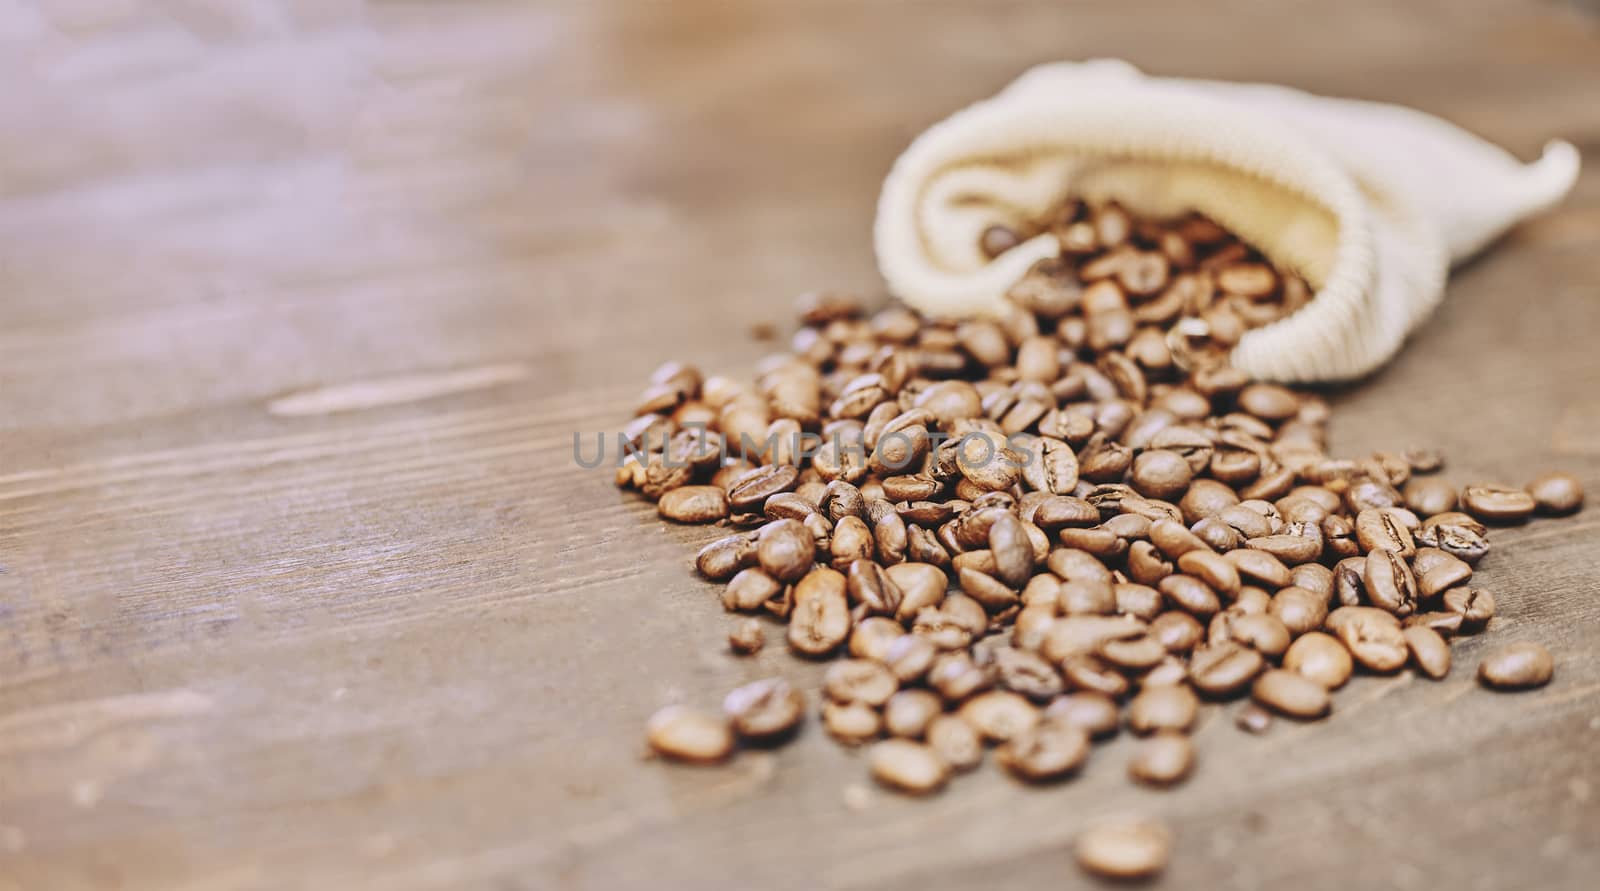 Coffee beans coming out of a sack on a wooden table